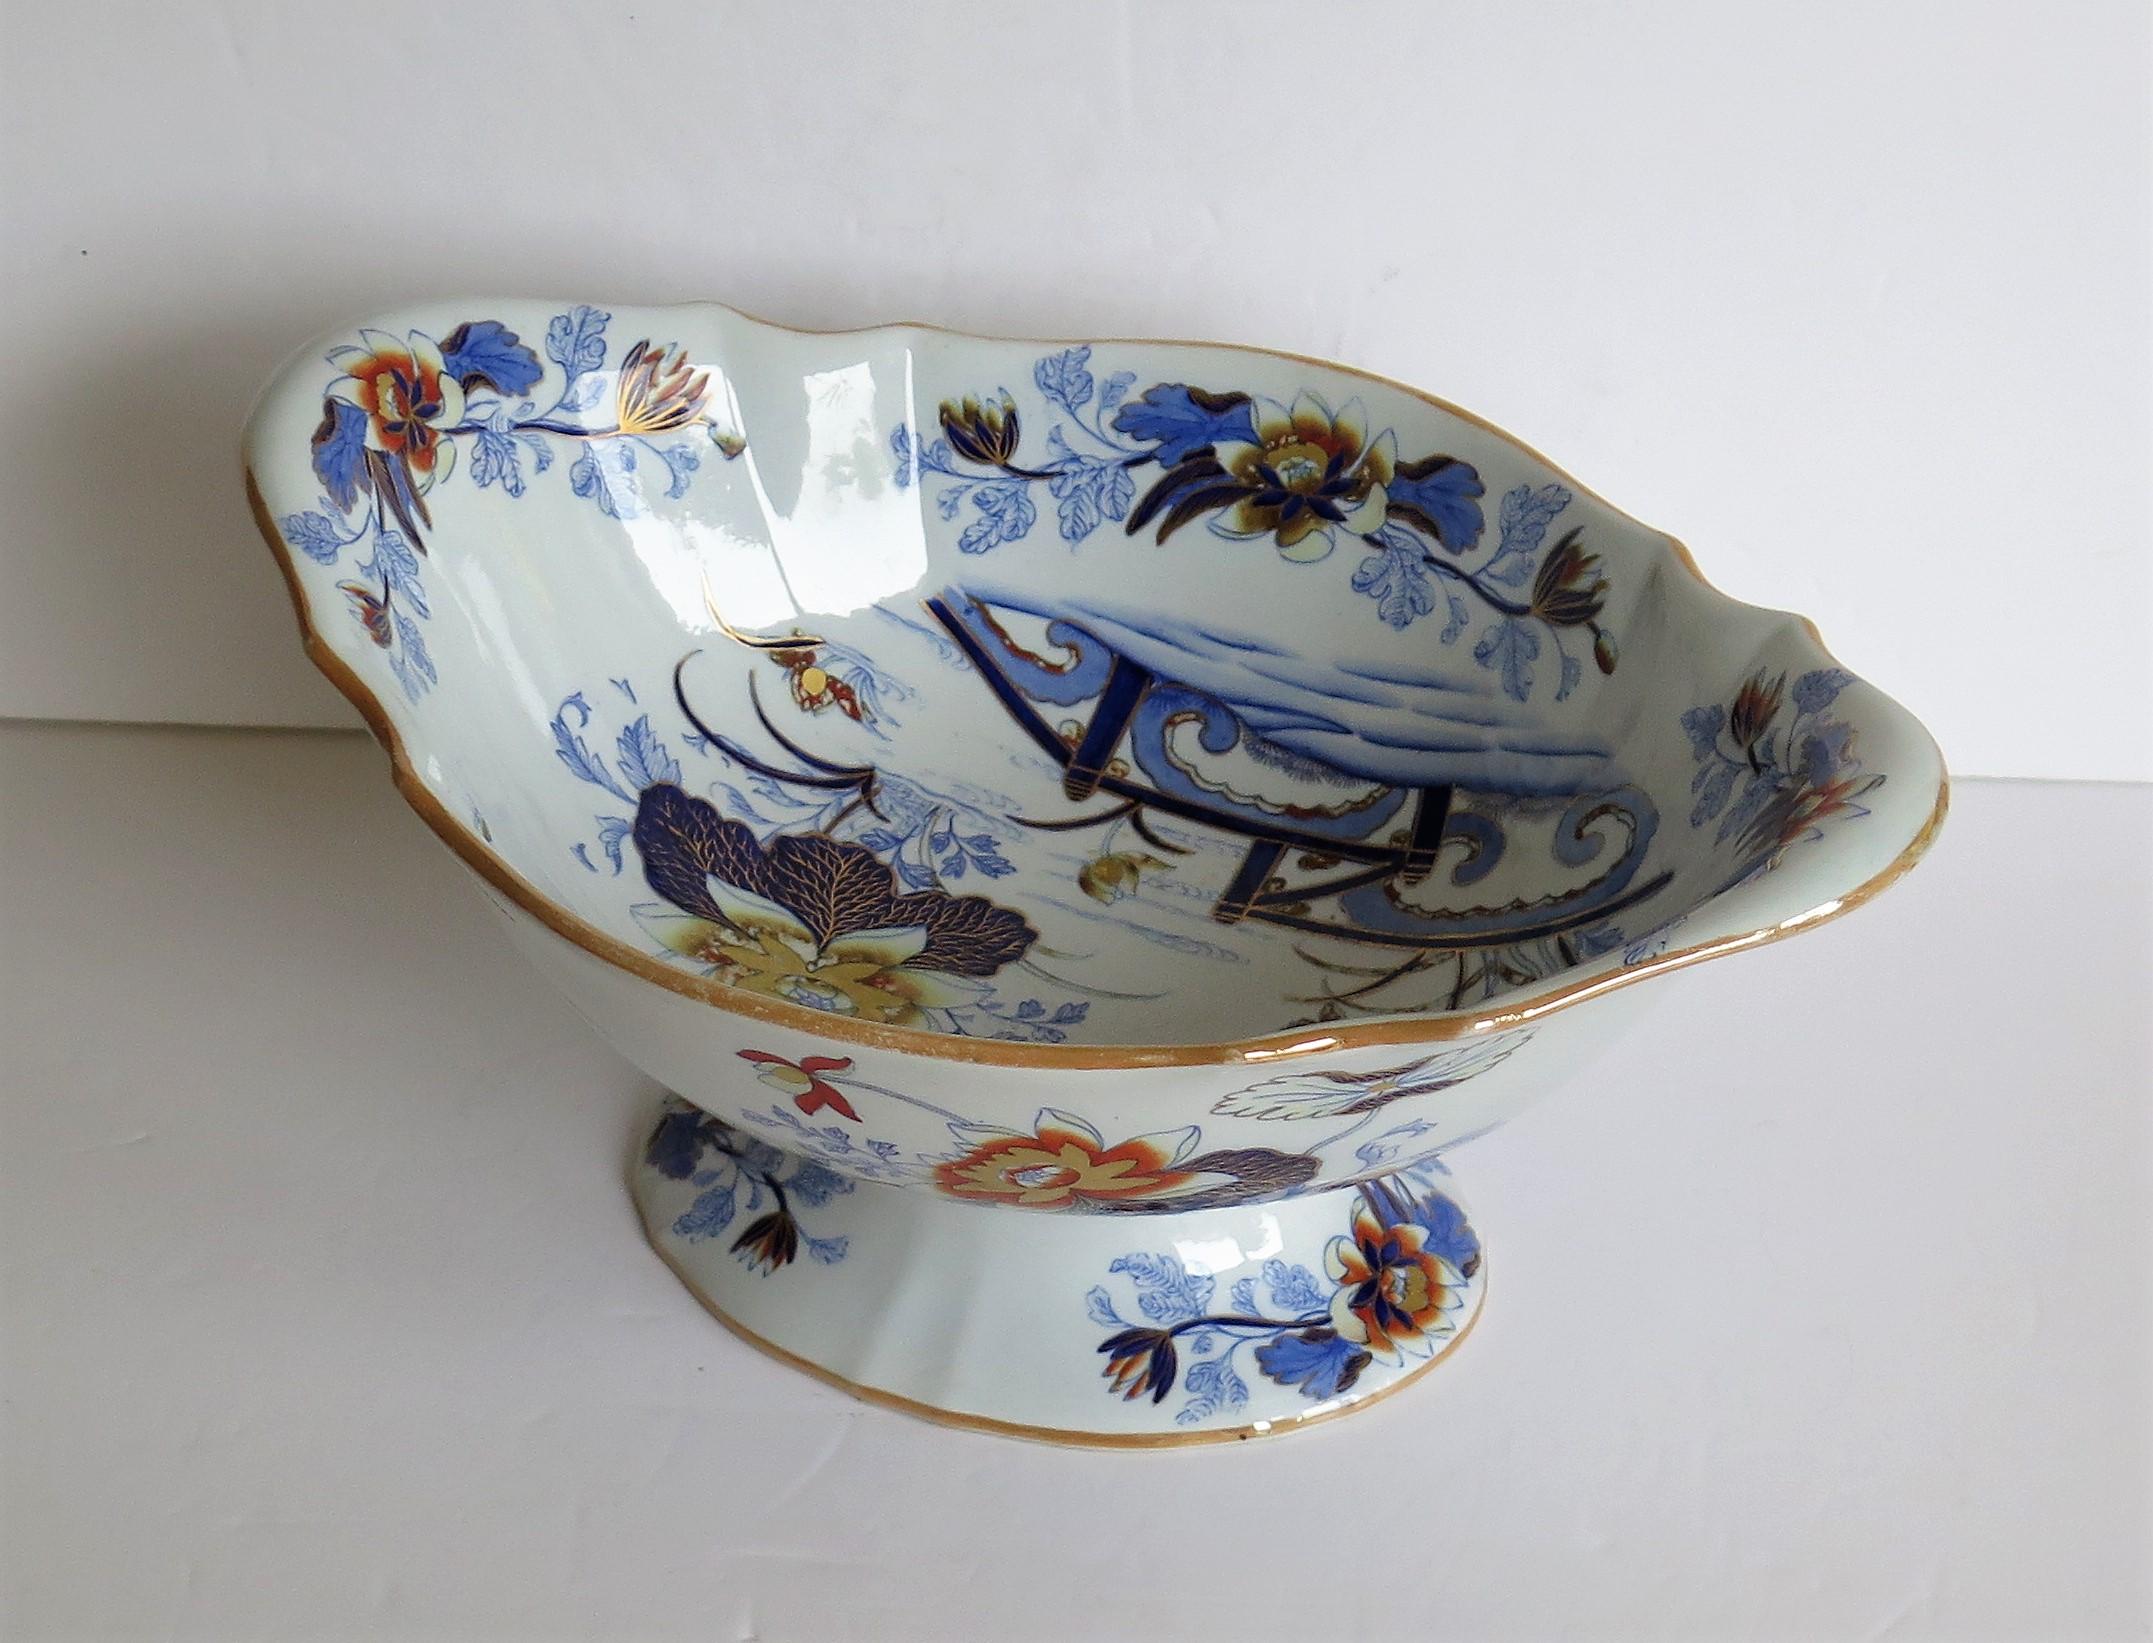 Hand-Painted Large Wedgwood Pedestal Bowl Centrepiece Stone China Ptn 1156, circa 1840 For Sale